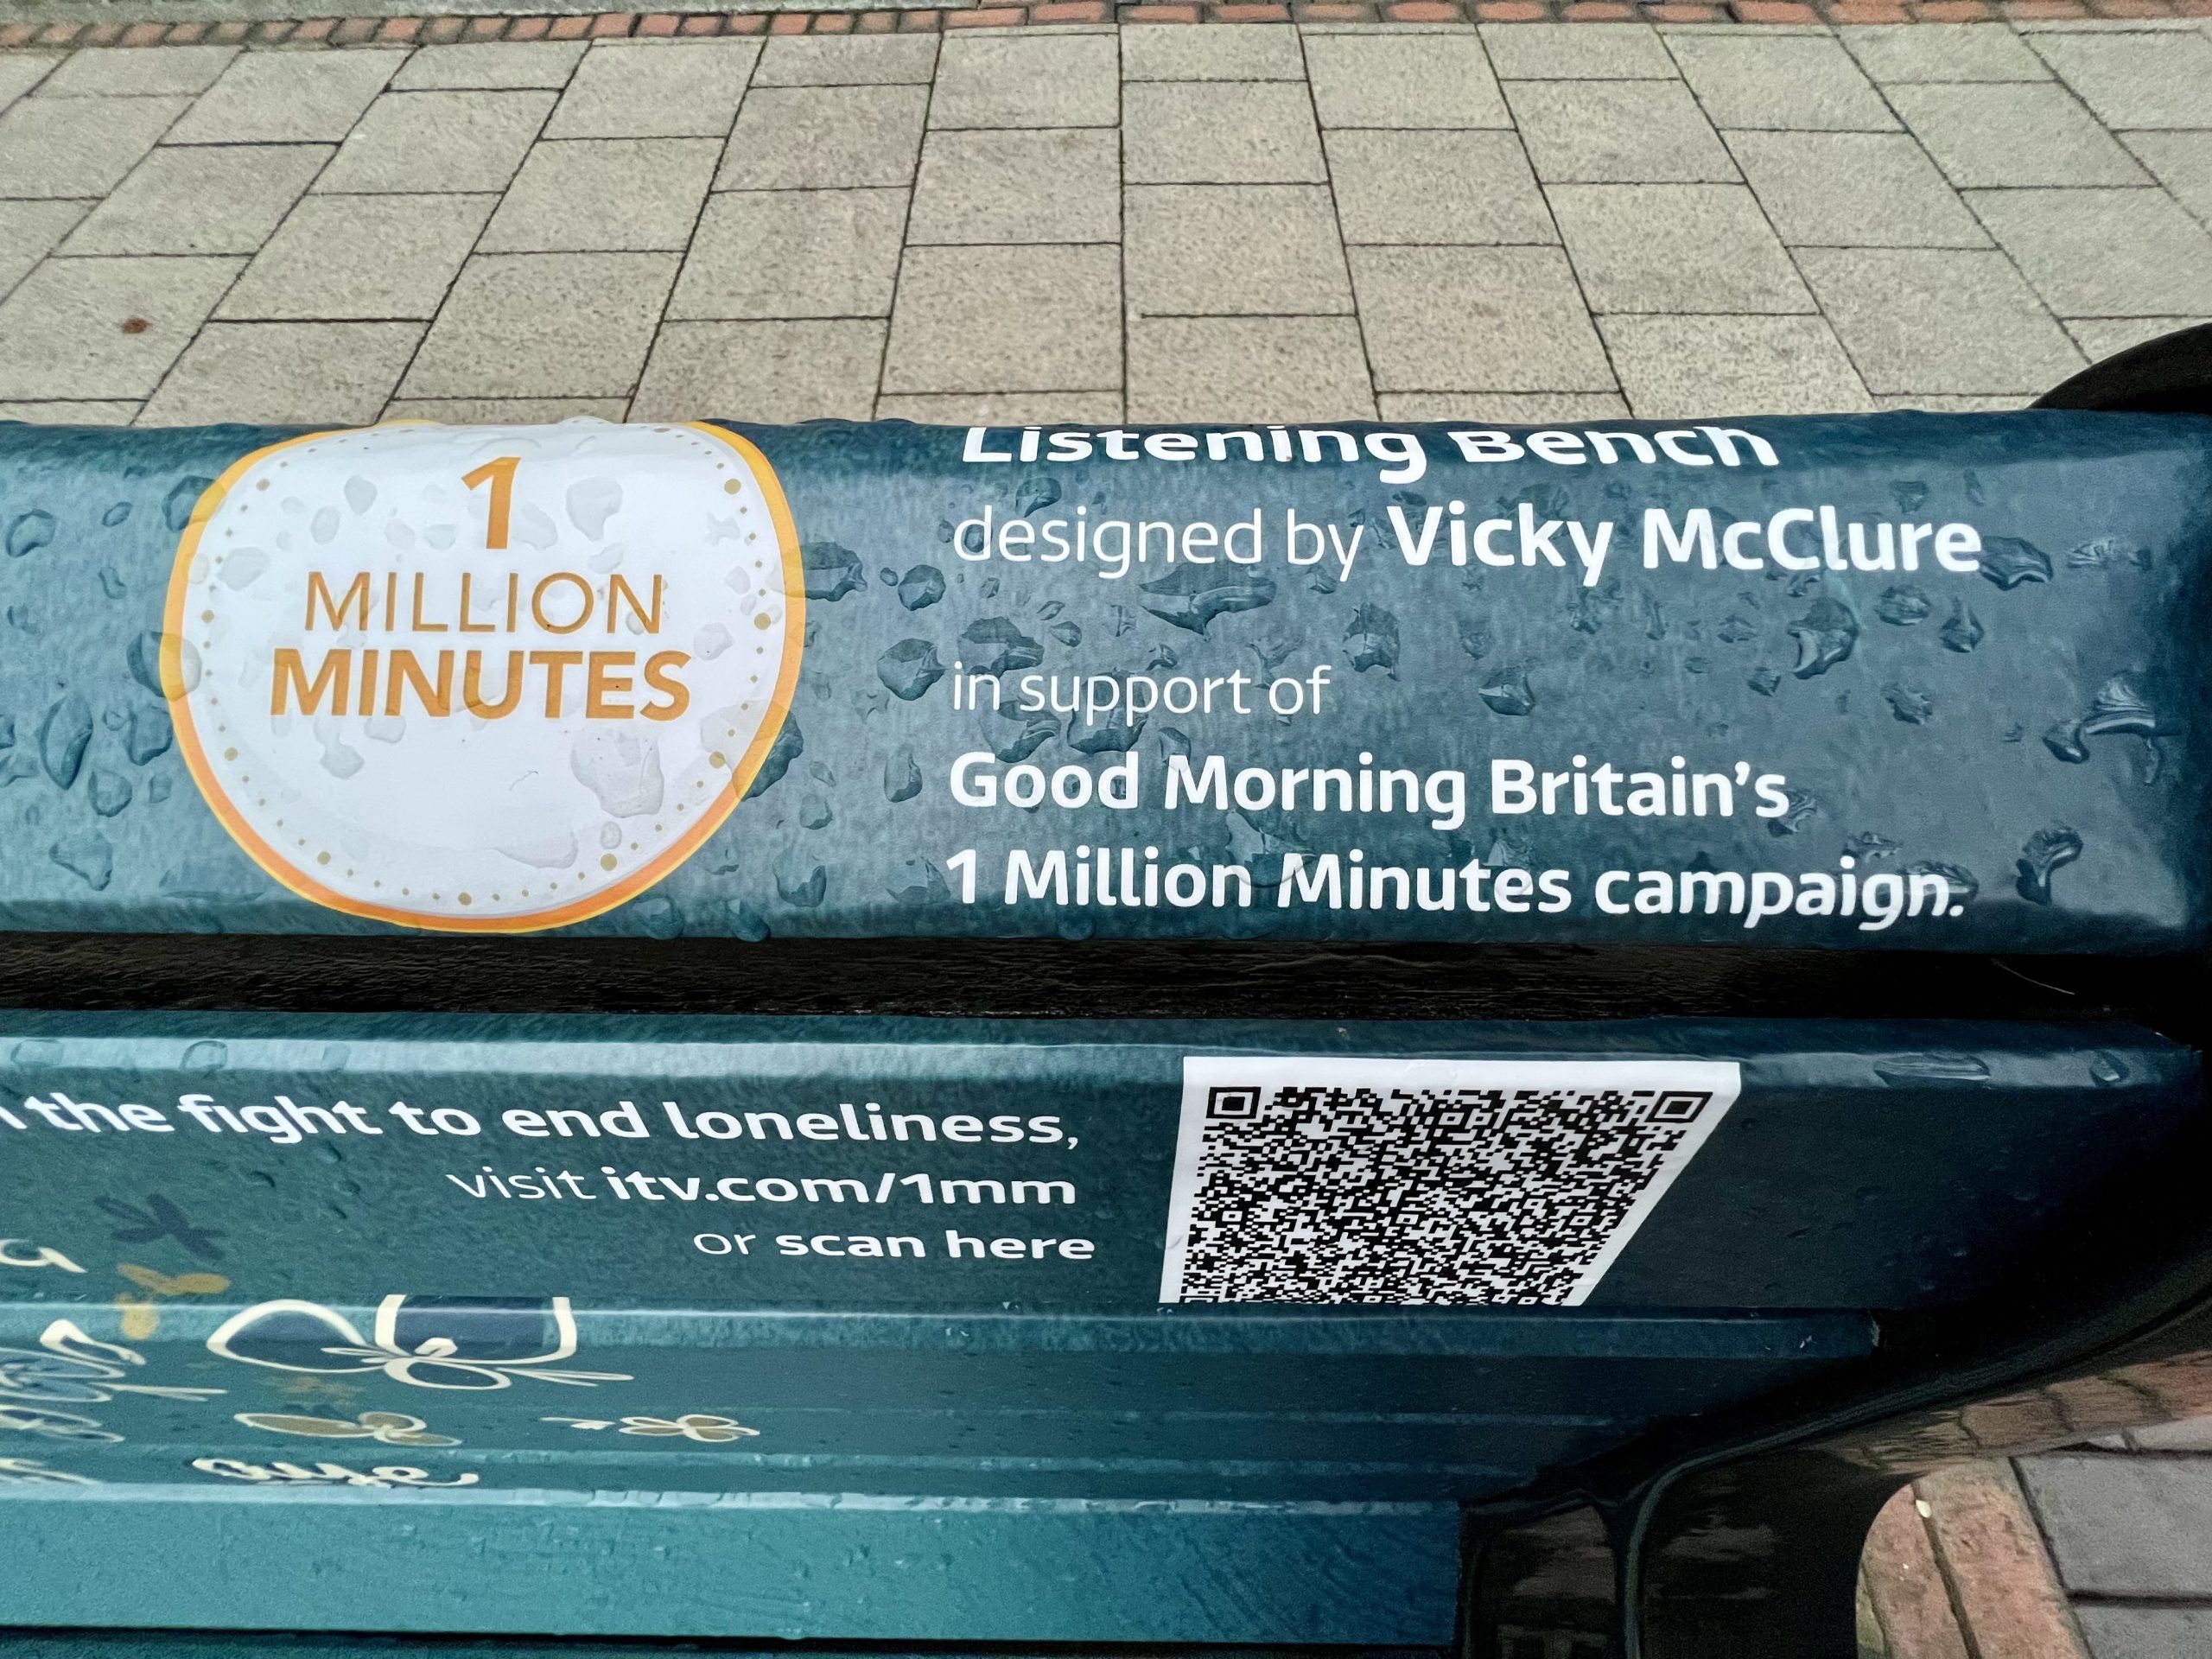 Pictures: Vicky McClure designs 'listening bench' for ITV One Hundred Minutes campaign - see how you can help